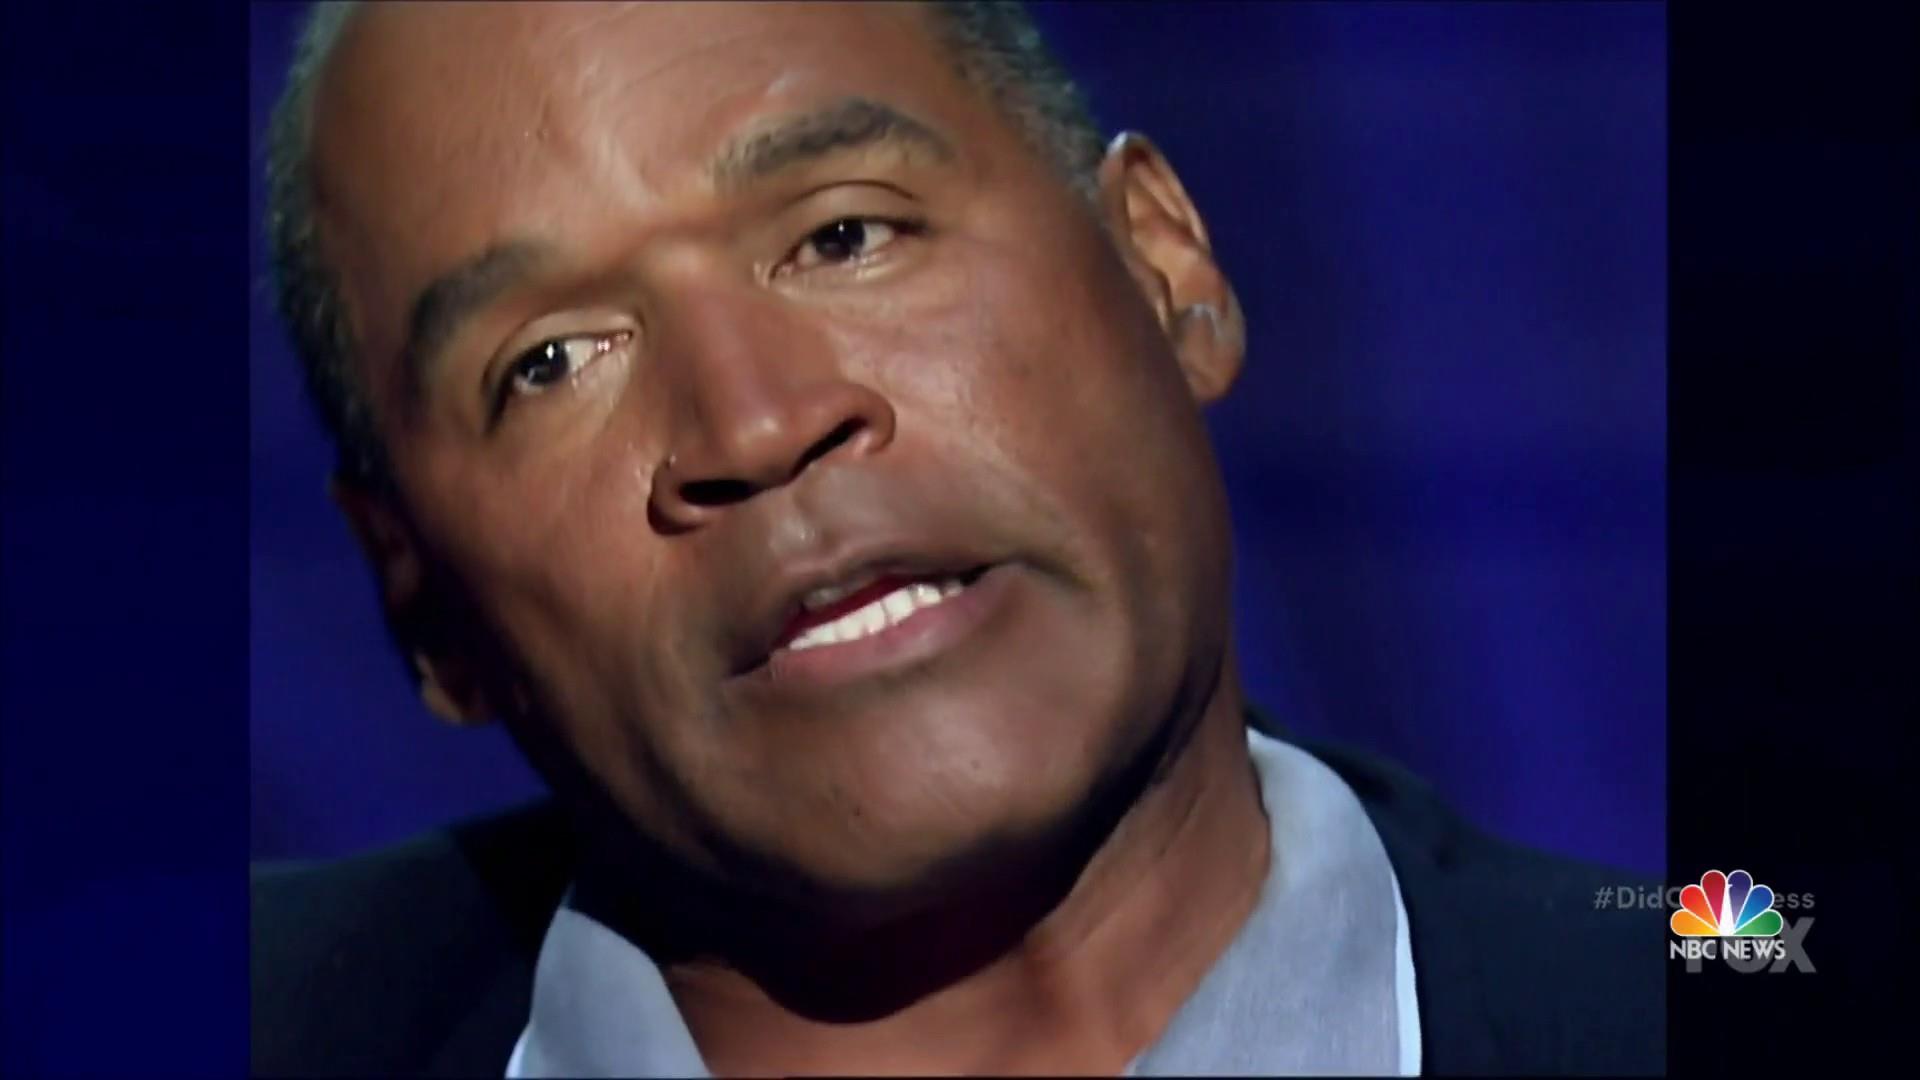 O.J. Simpson hypothetically confesses in ‘lost’ interview - NBC News